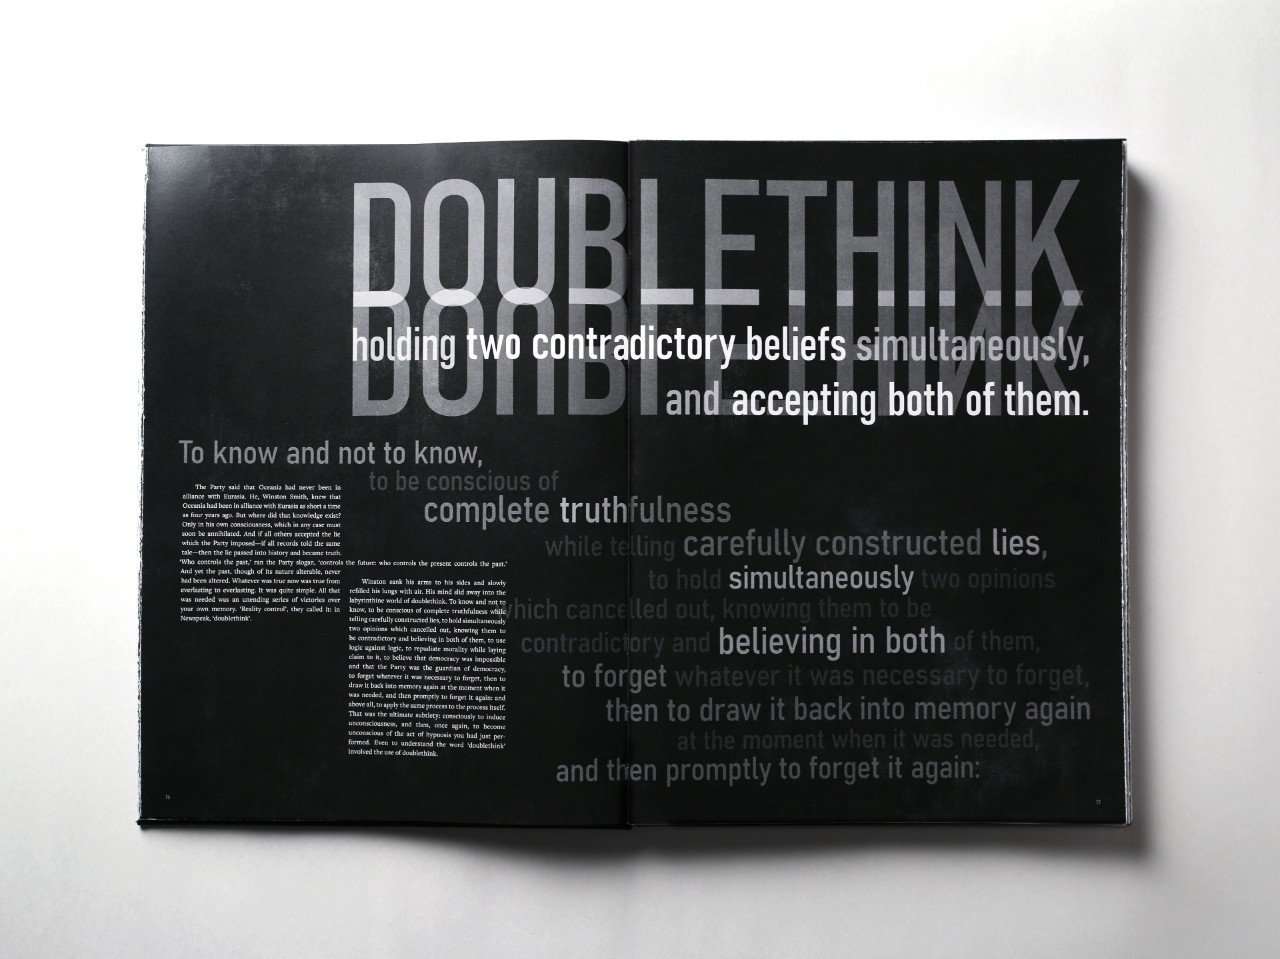 The top of a black page with white texts reads "Double think" in large letters. Other white text flips and overlaps in different opacities. 